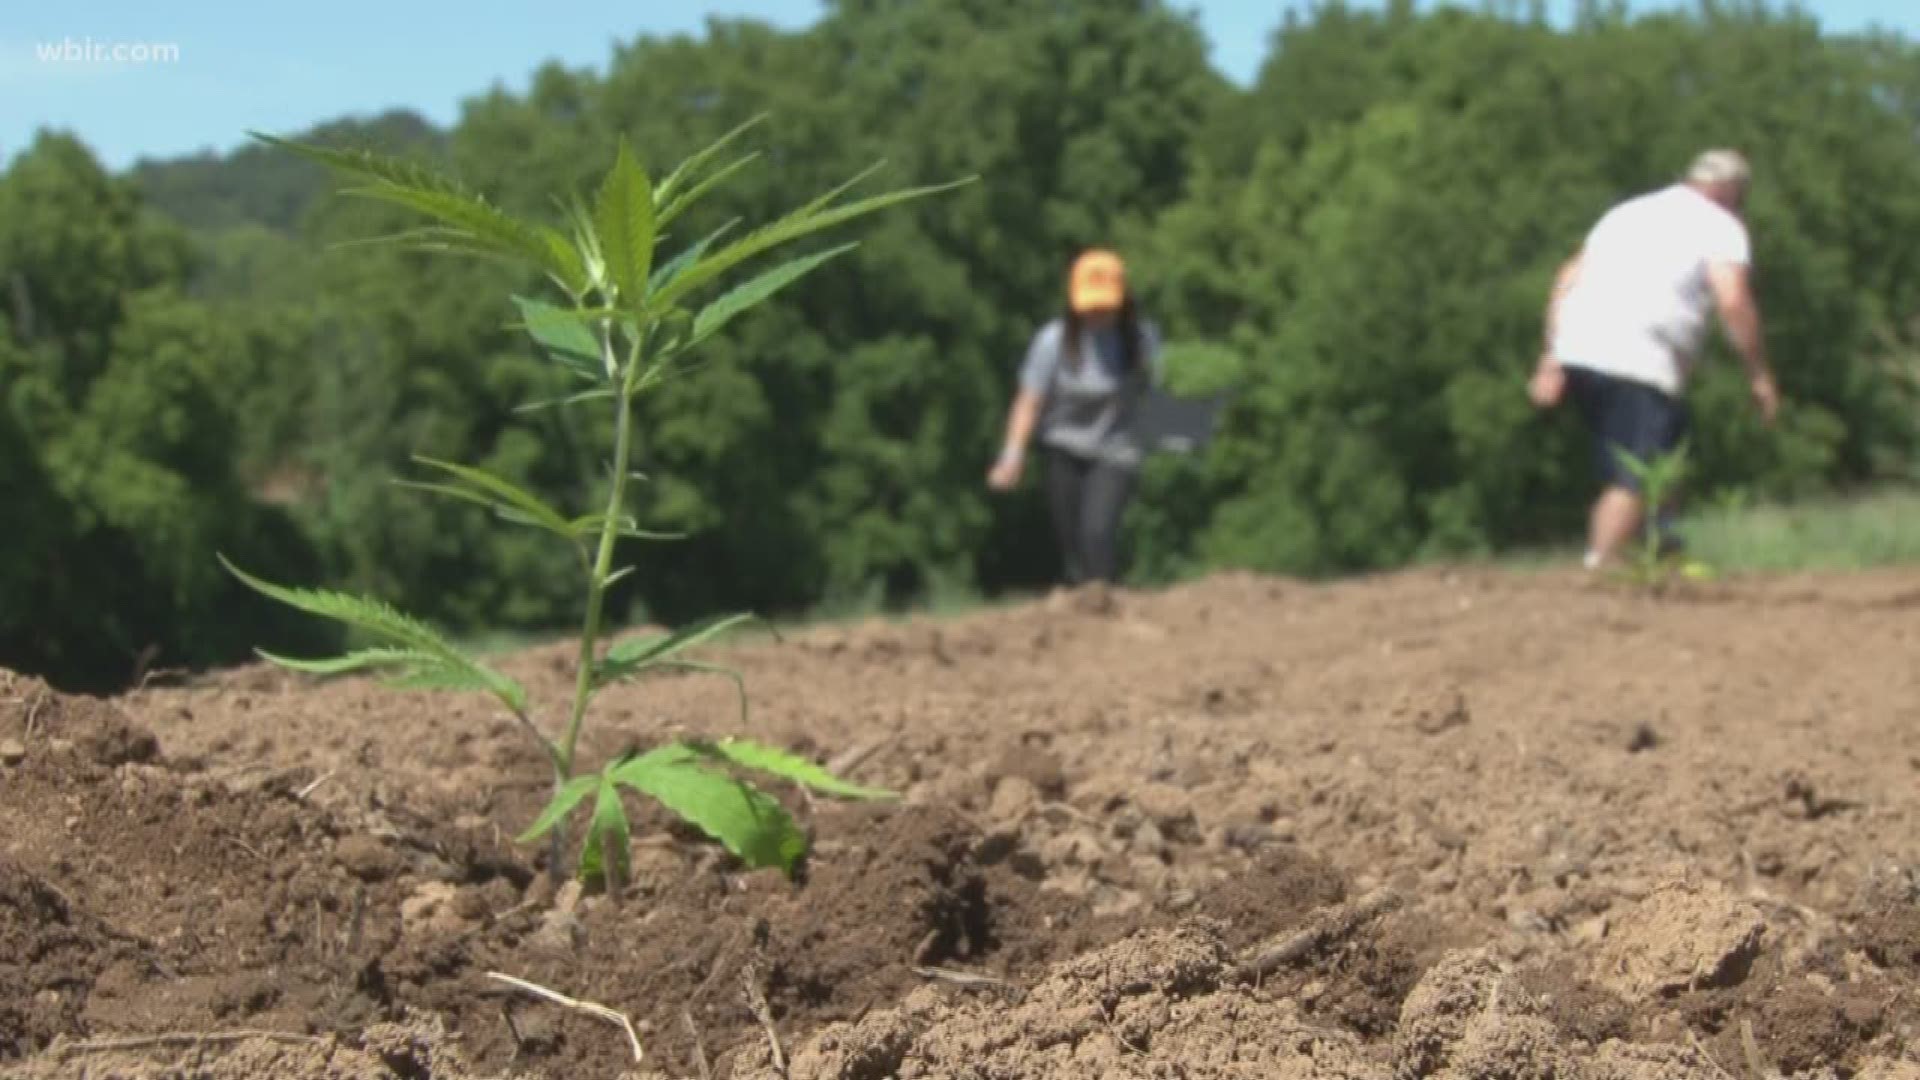 It's officially growing season for hemp in Tennessee. Nearly 3,000 farmers are planting and starting to see growth in their hemp seeds and clones.